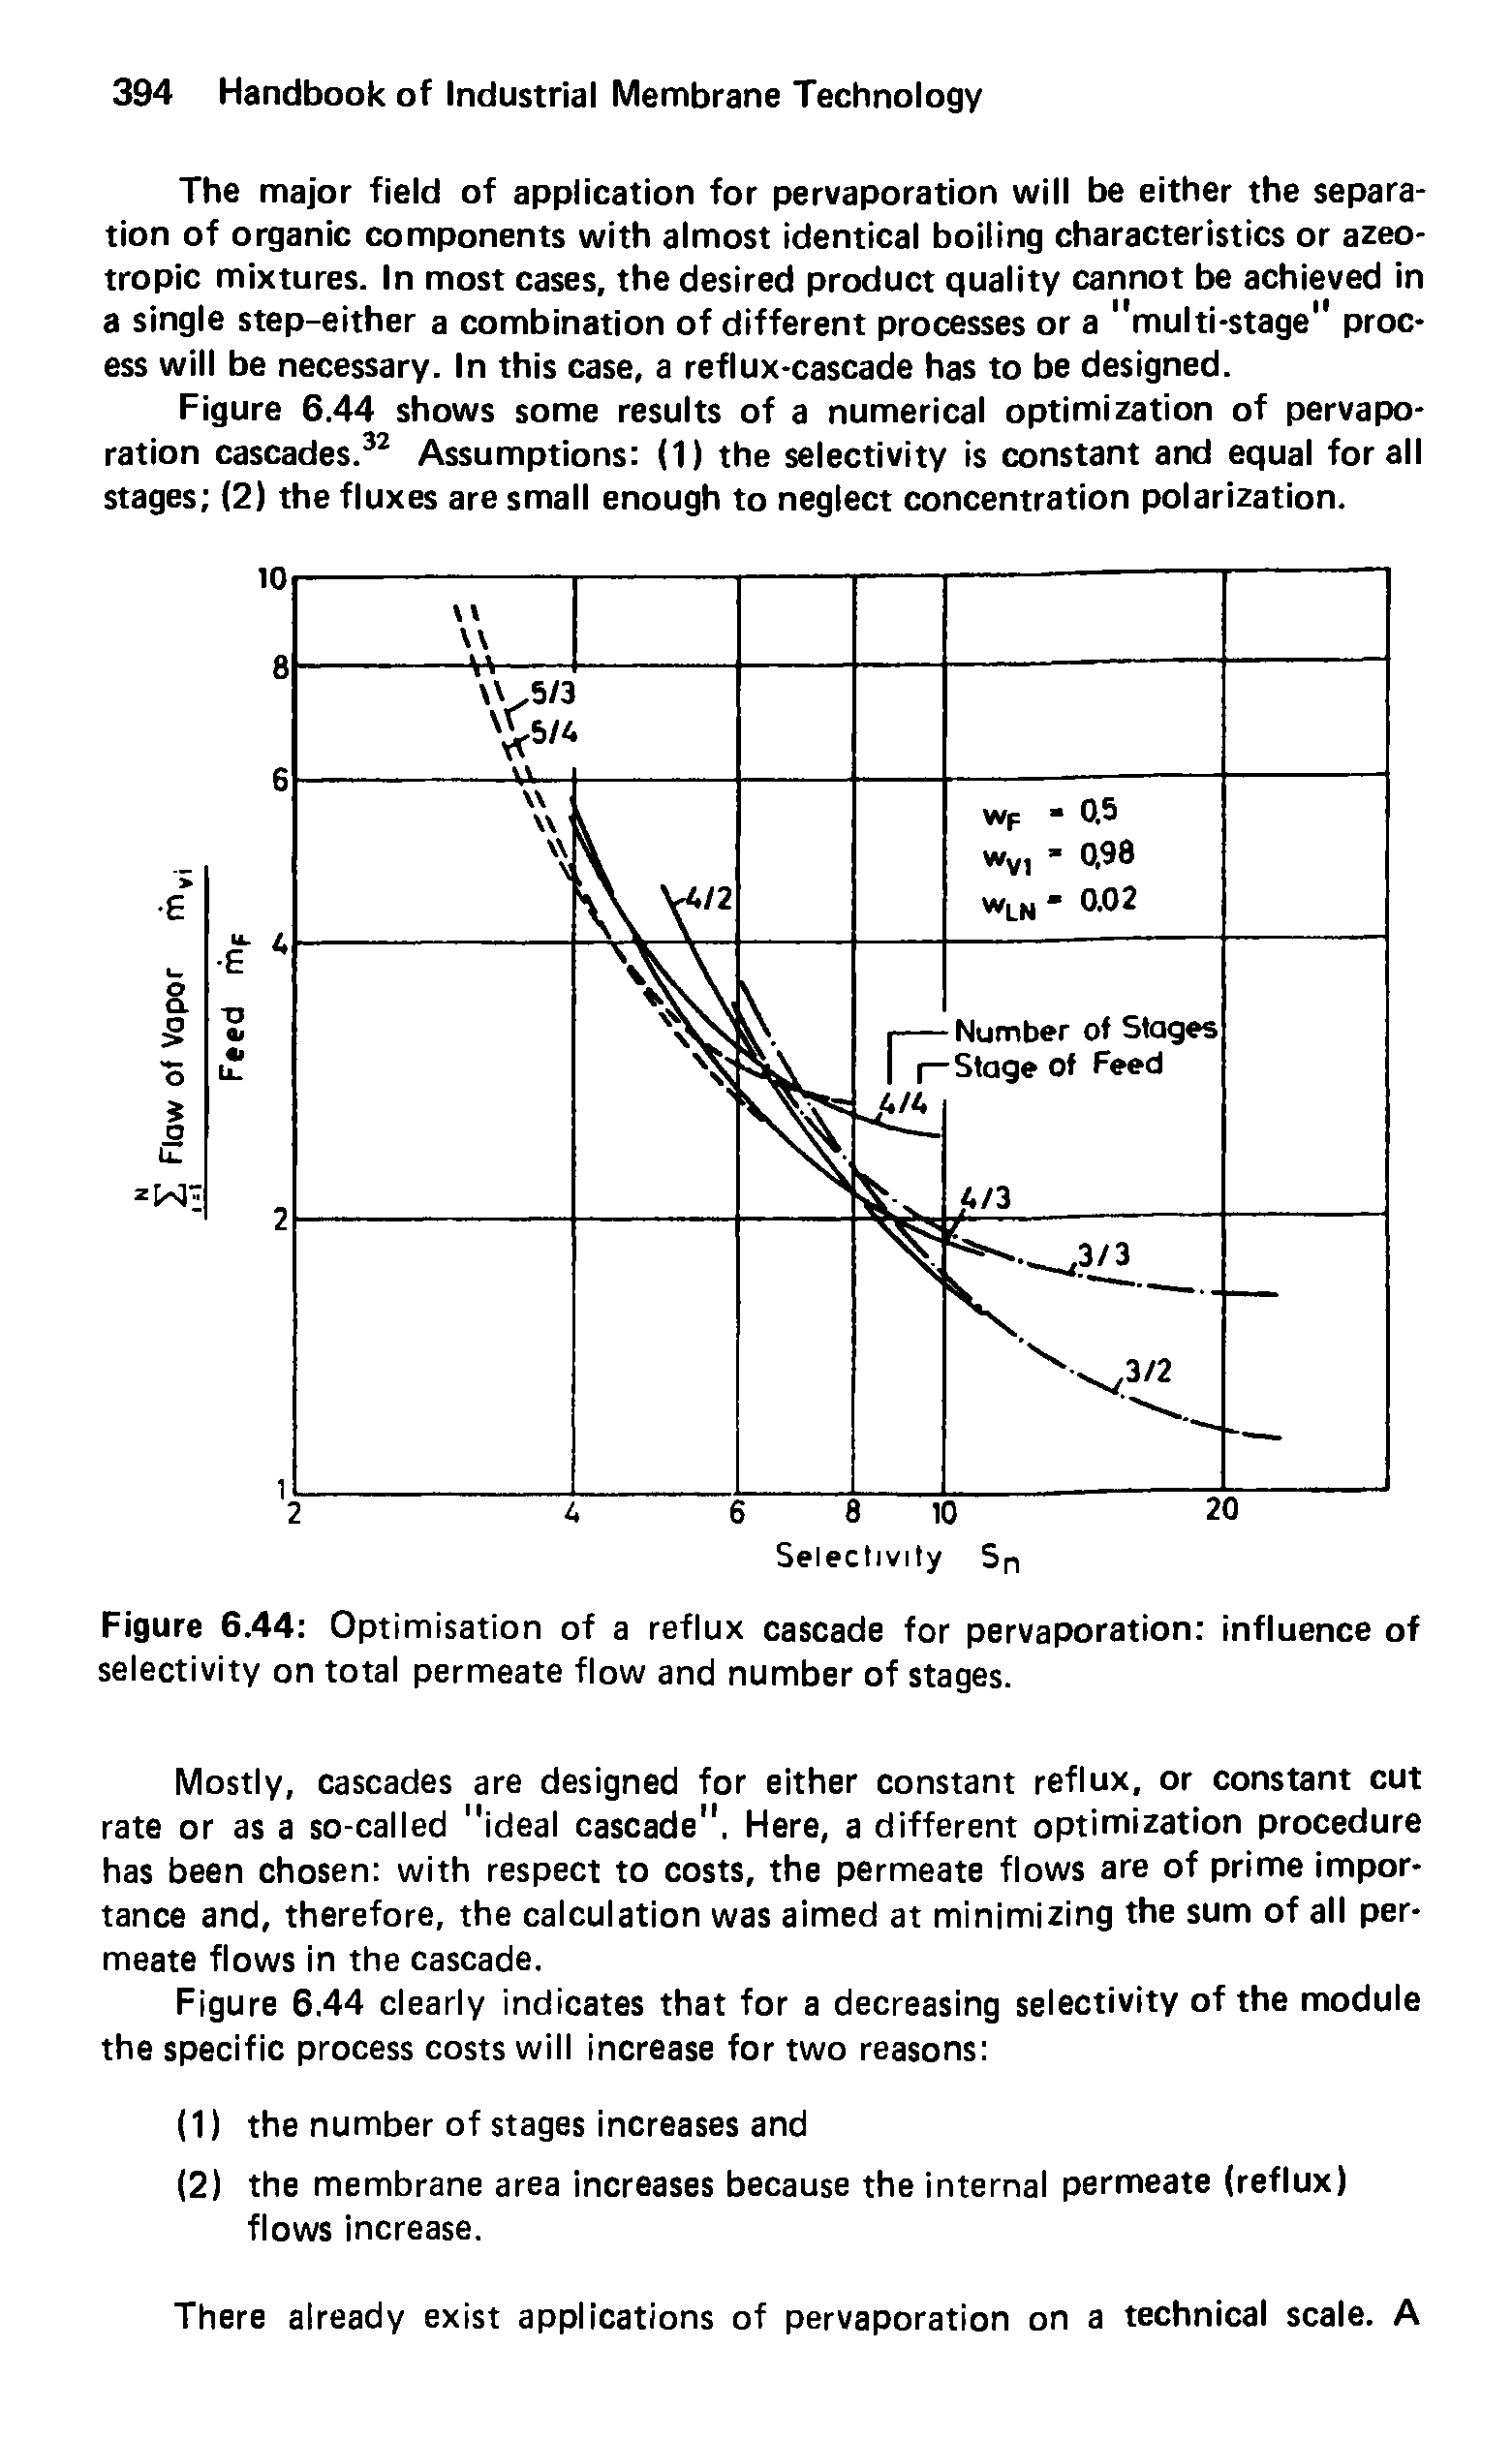 Figure 6.44 Optimisation of a reflux cascade for pervaporation influence of selectivity on total permeate flow and number of stages.